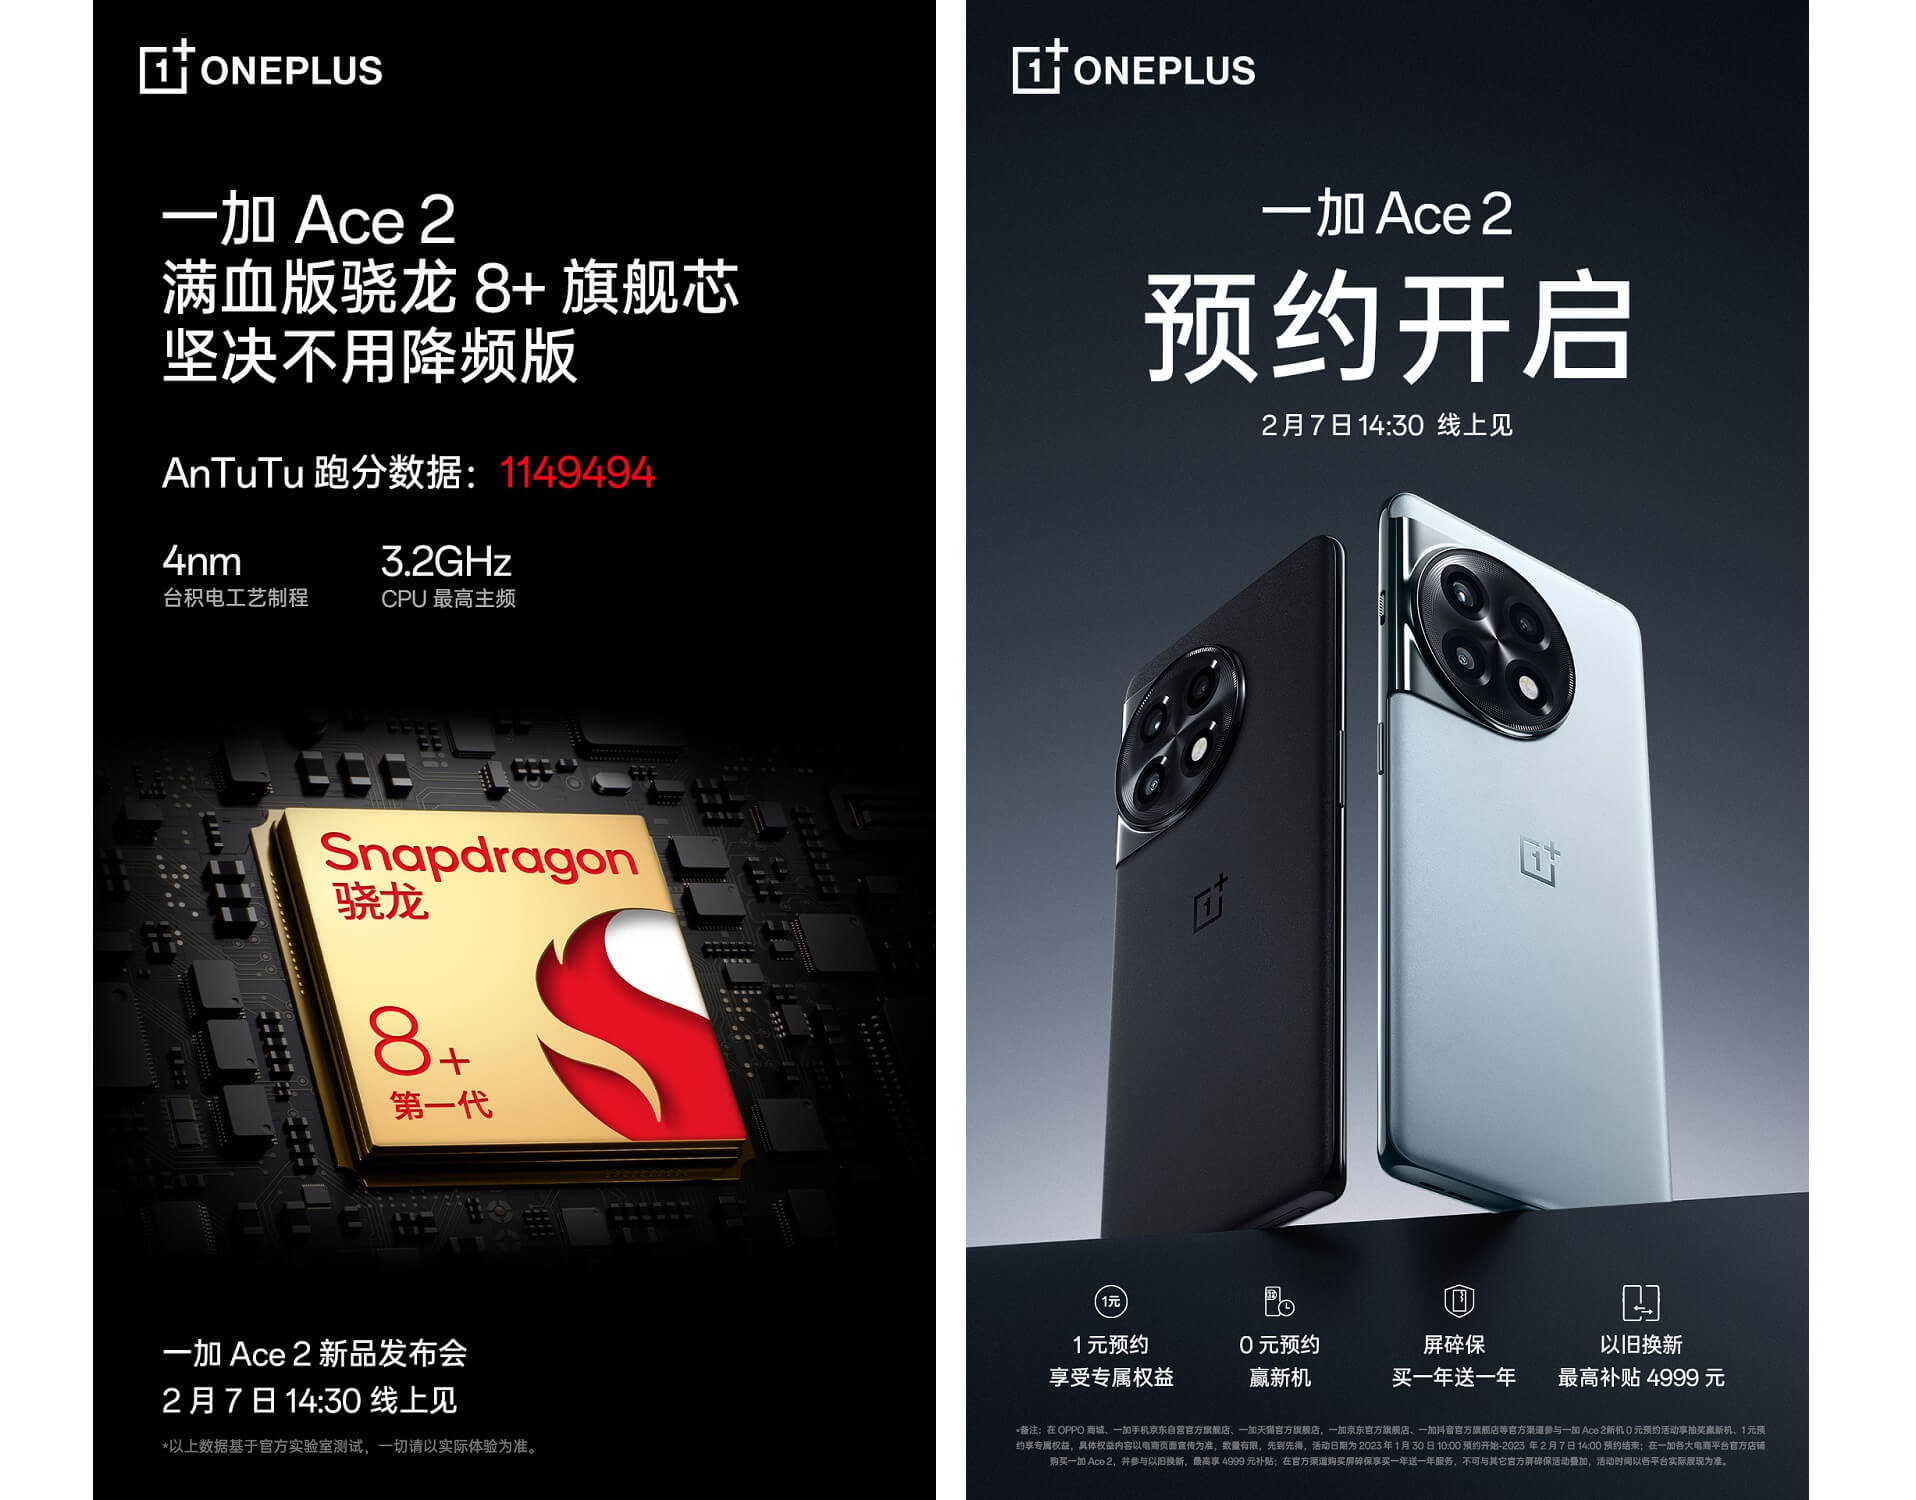 OnePlus Ace 2 (11R) features cn